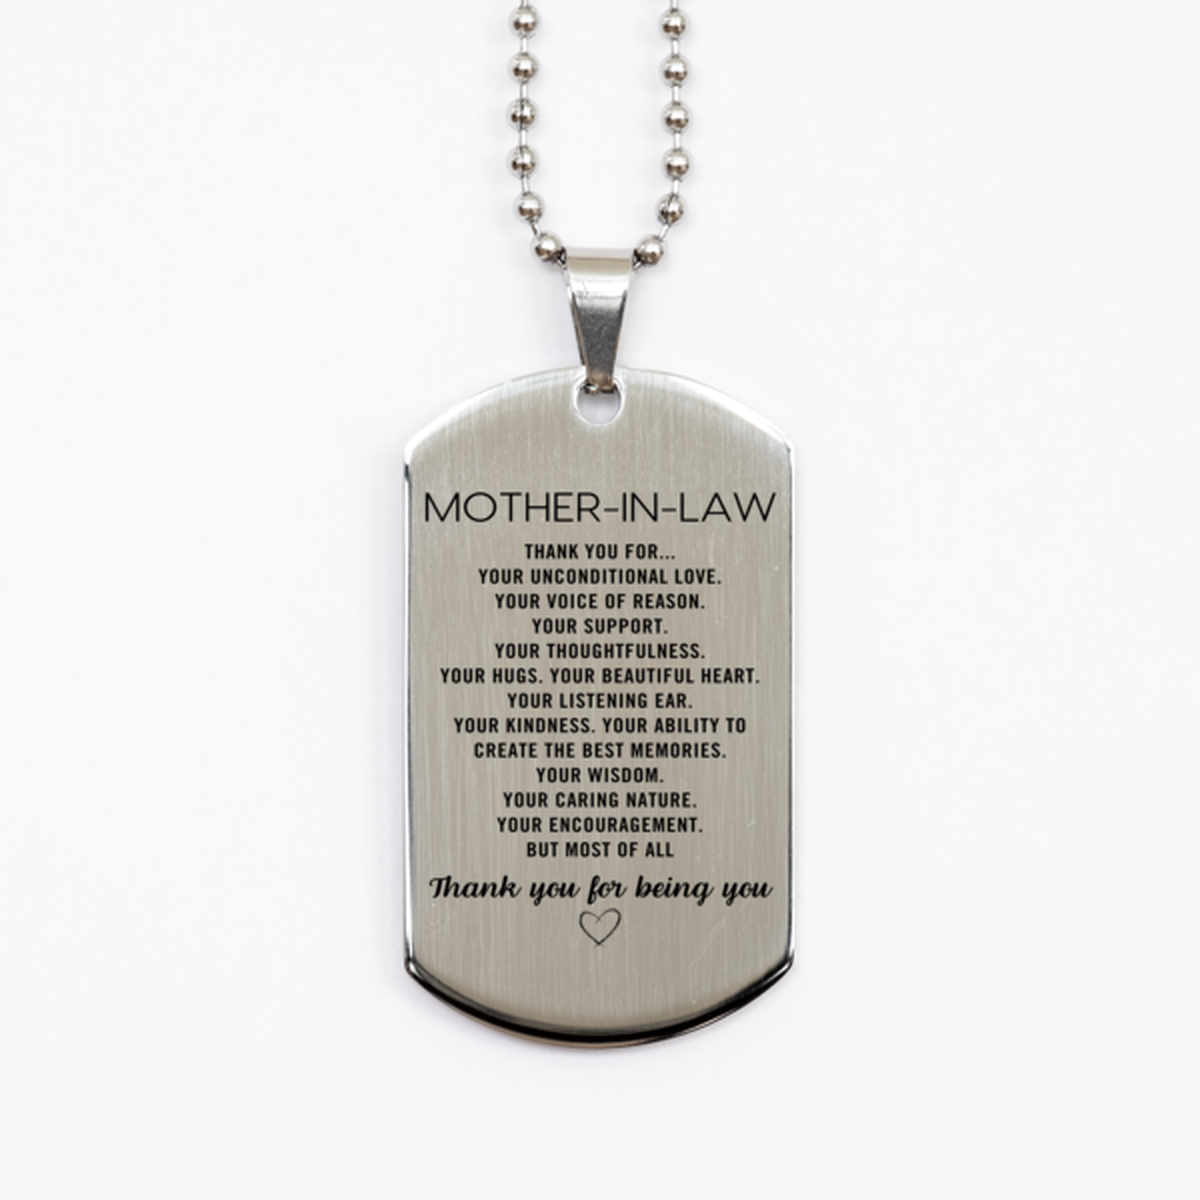 Mother-In-Law Silver Dog Tag Custom, Engraved Gifts For Mother-In-Law Christmas Graduation Birthday Gifts for Men Women Mother-In-Law Thank you for Your unconditional love